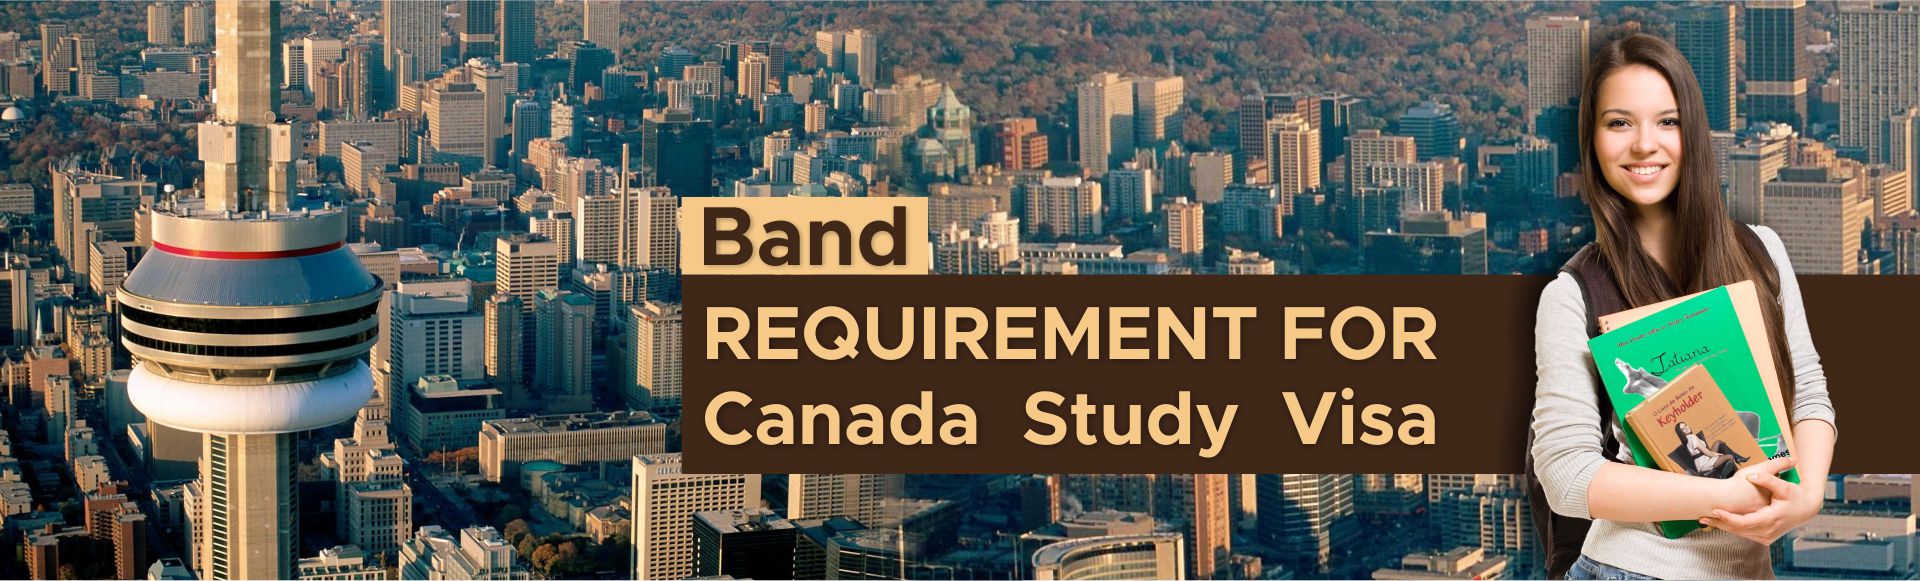 Band Requirement for Canada Study Visa